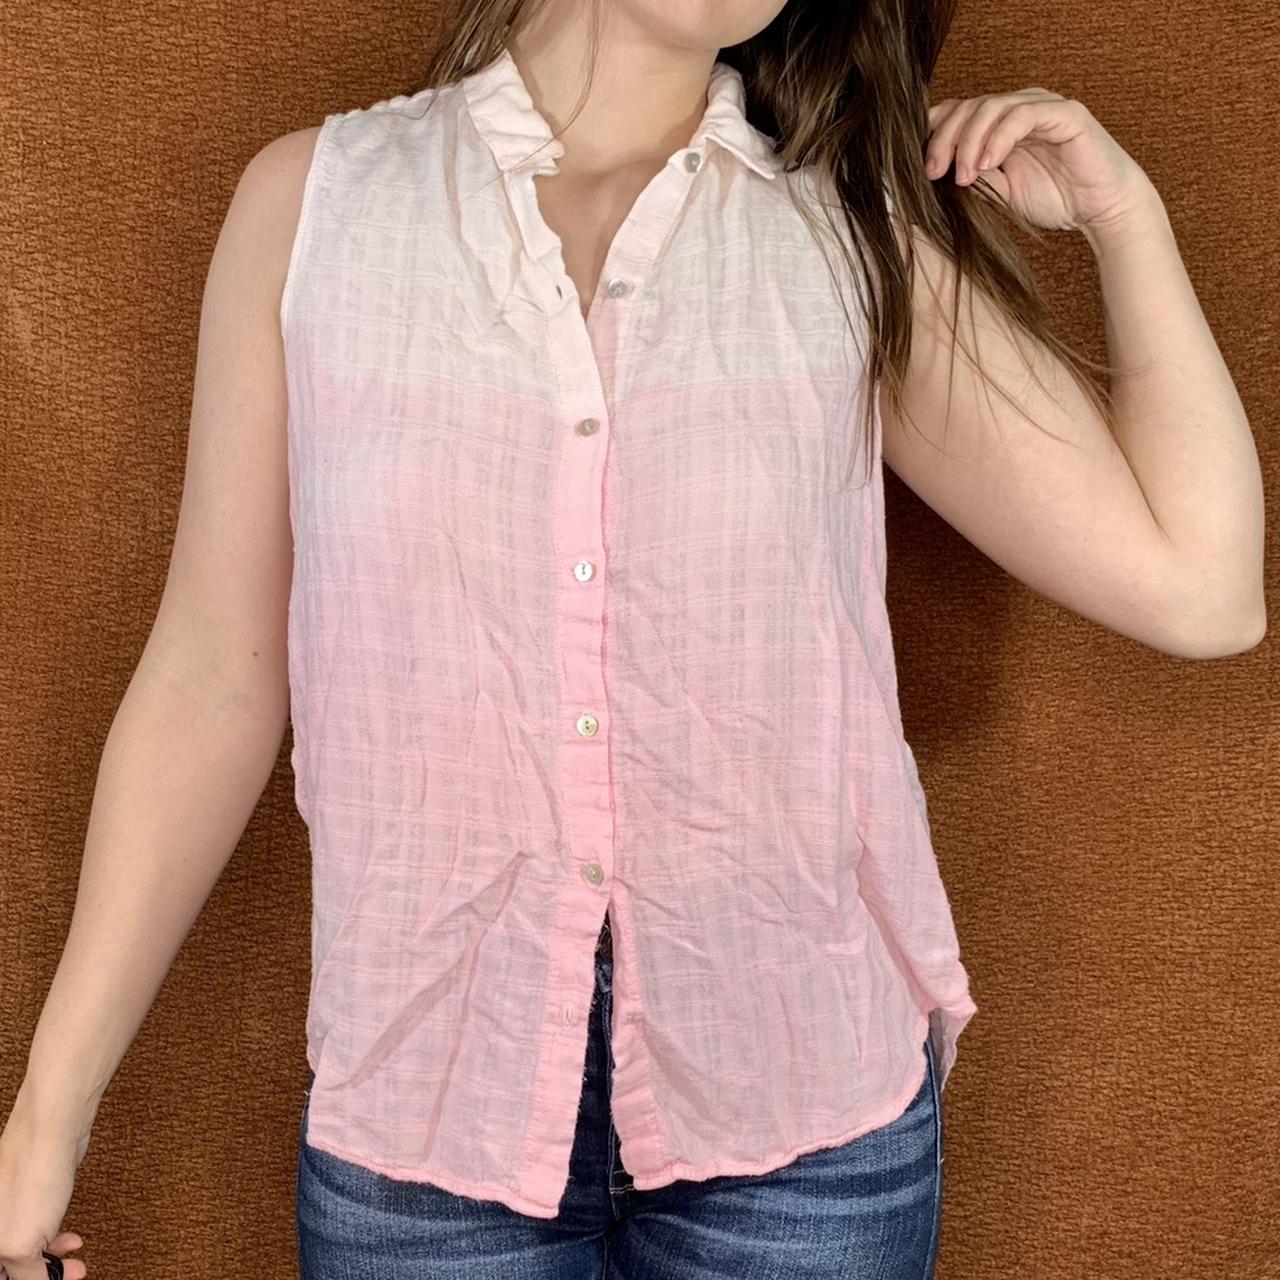 Product Image 2 - Pink bleach-dyed sleeveless shirt, size